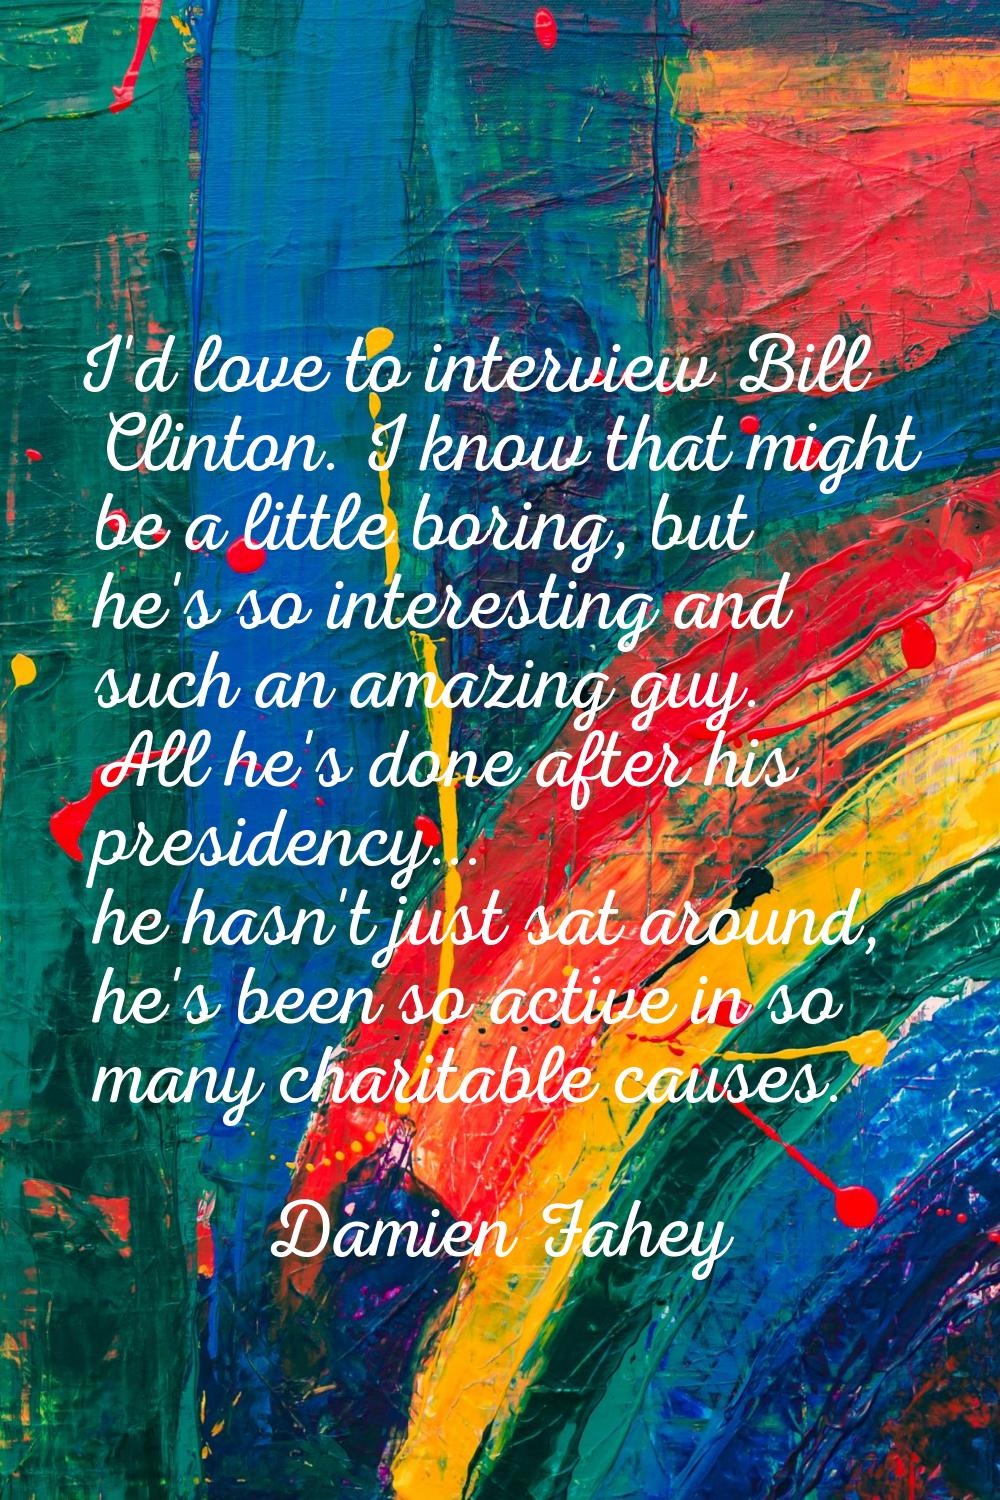 I'd love to interview Bill Clinton. I know that might be a little boring, but he's so interesting a